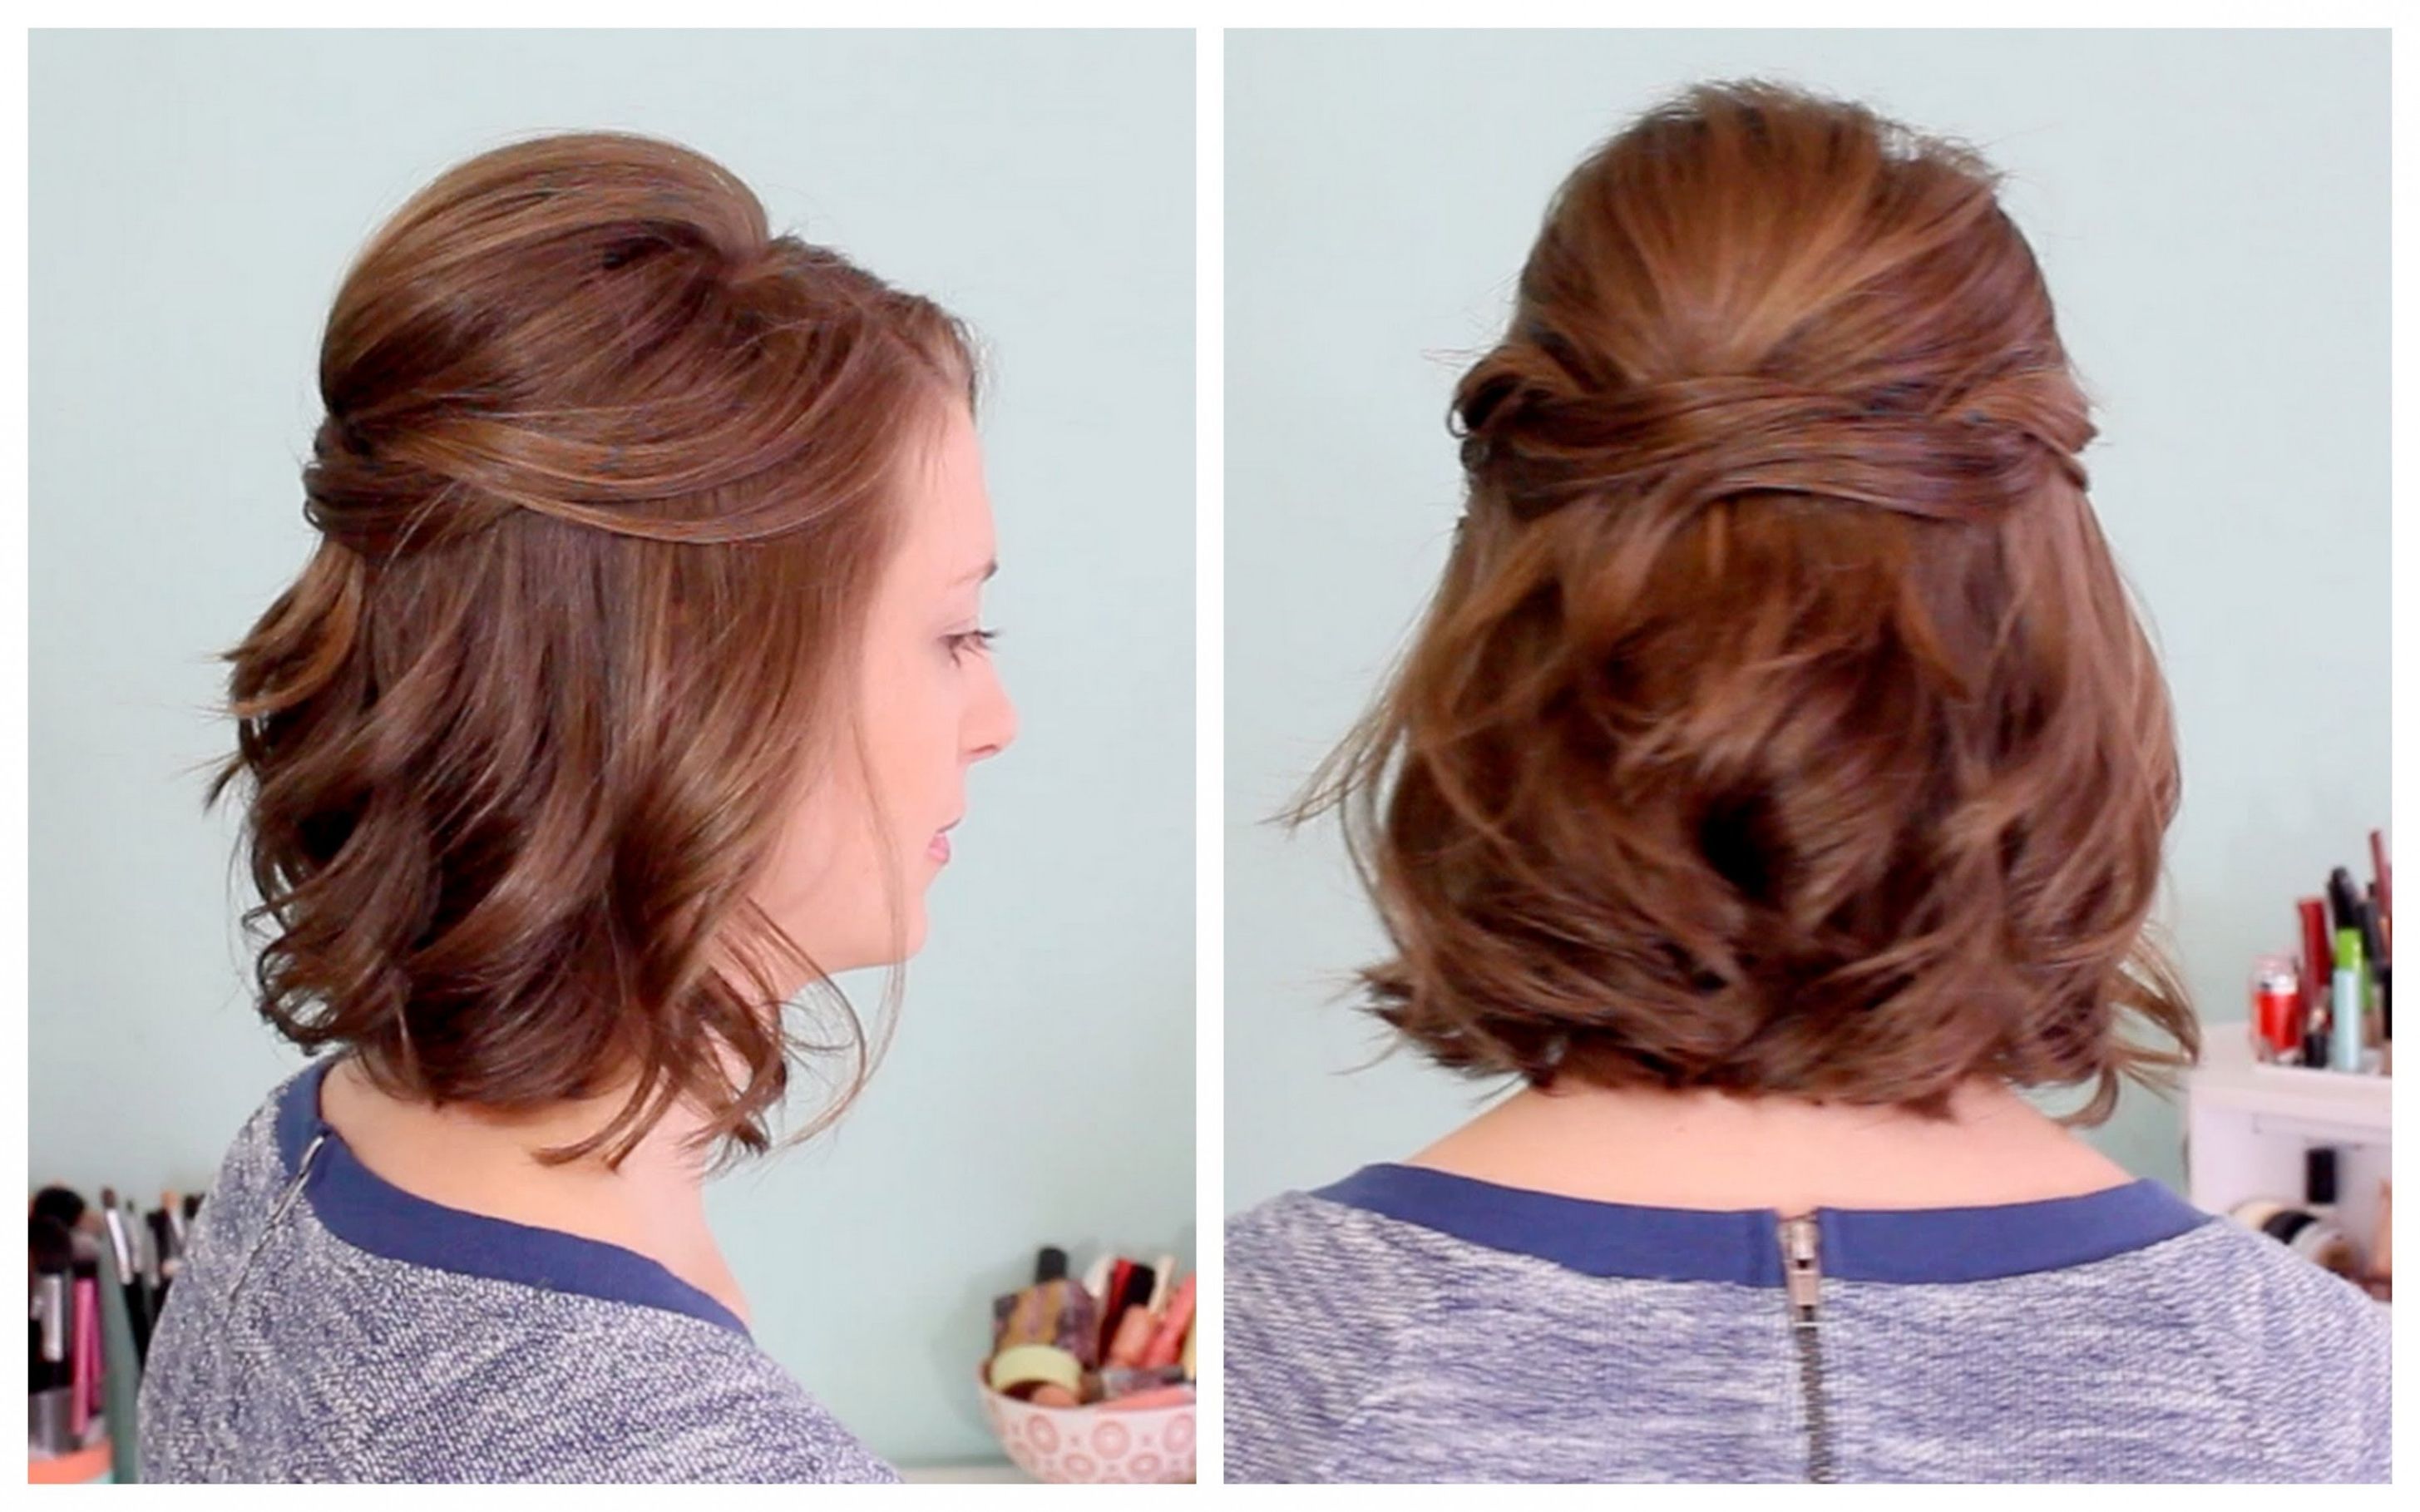 Easy Half Up Half Down Hairstyles For Curly Hair Archives – Hair In Half Up Half Down Short Hairstyles (View 19 of 25)